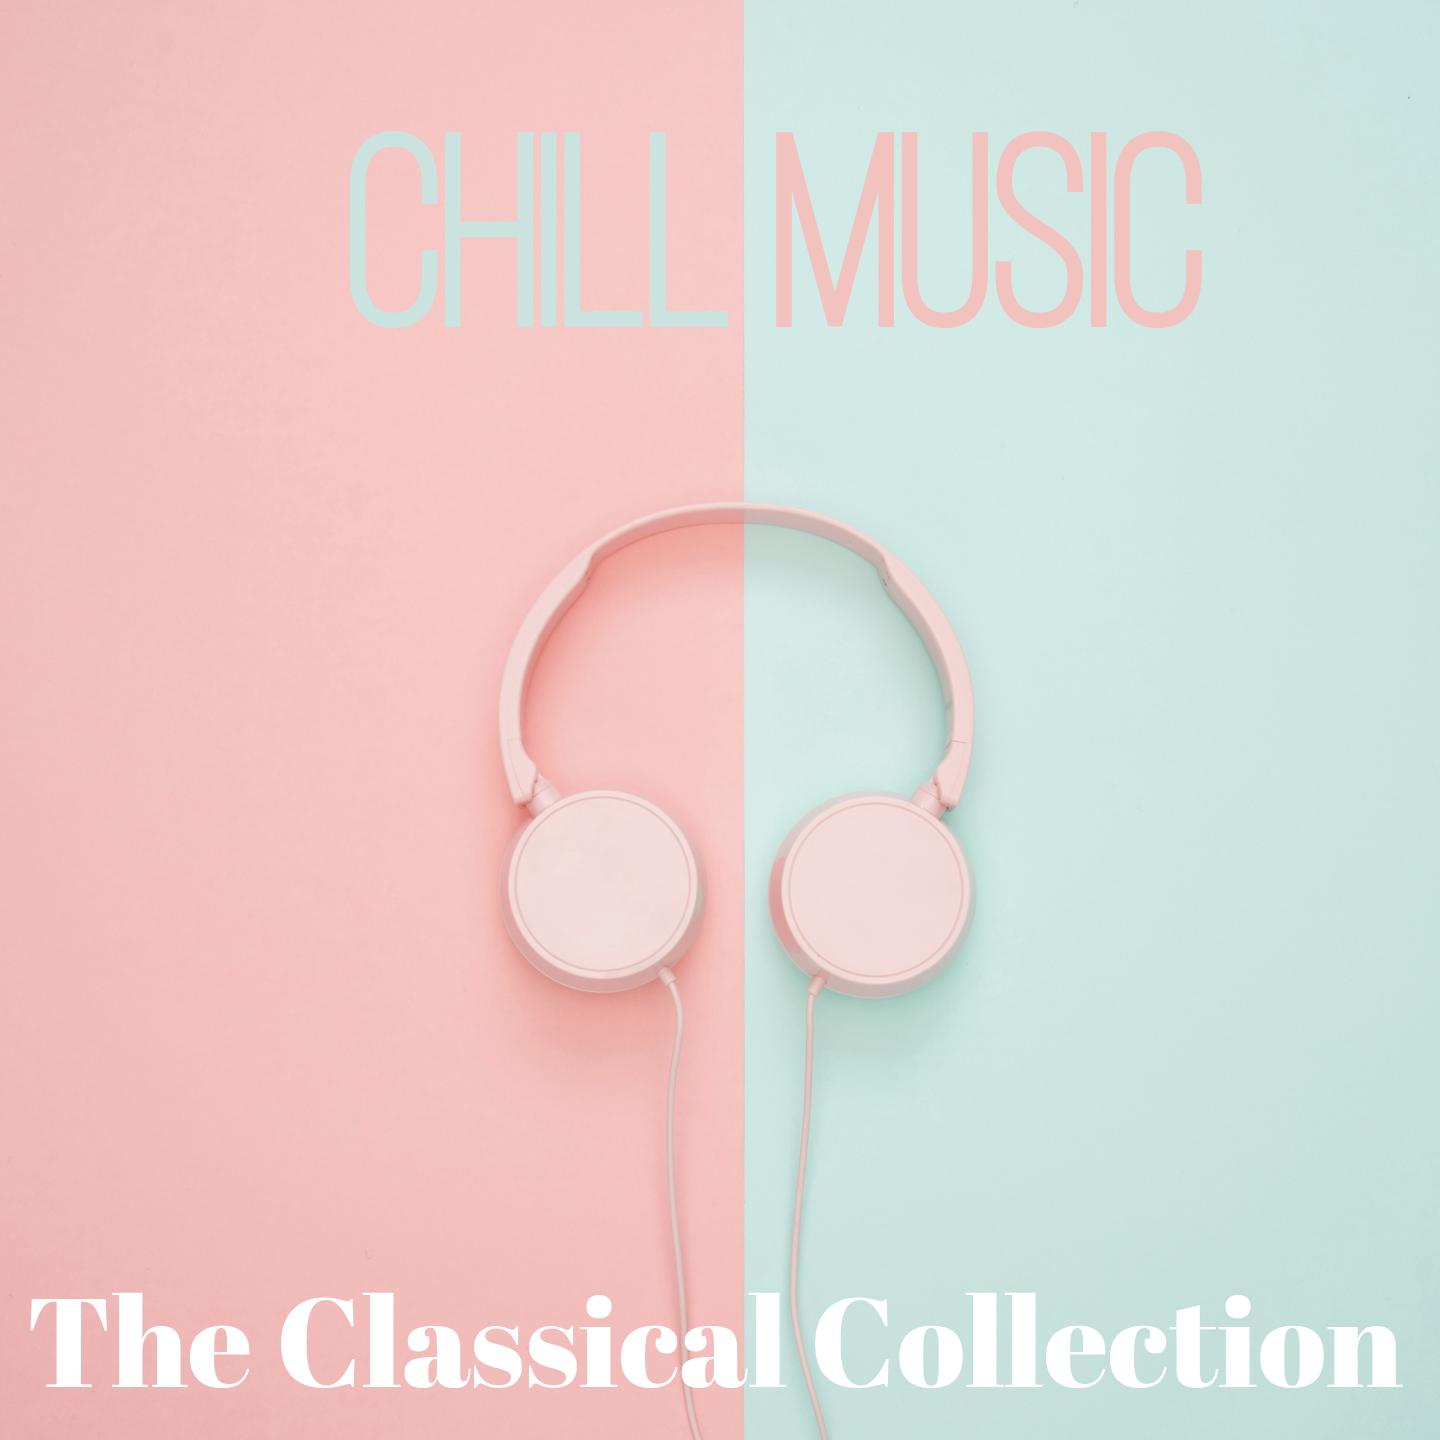 Chill music (The classical collection)